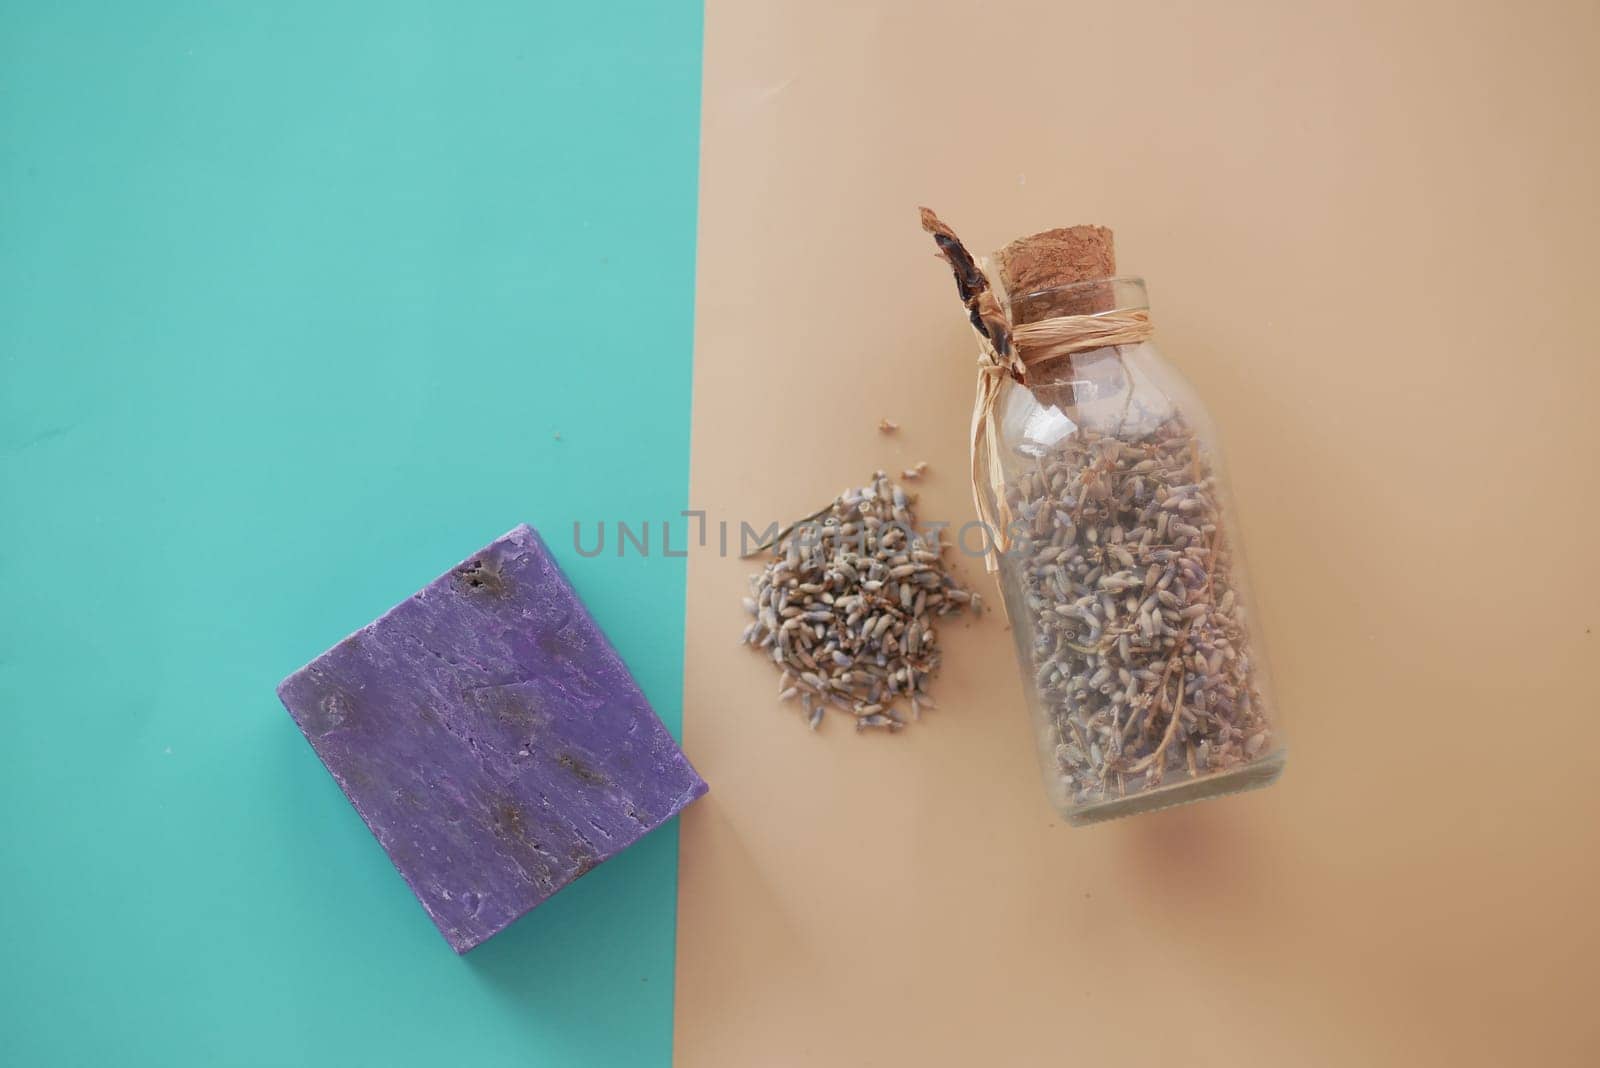 Homemade natural soap bar and lavender flower on table ,